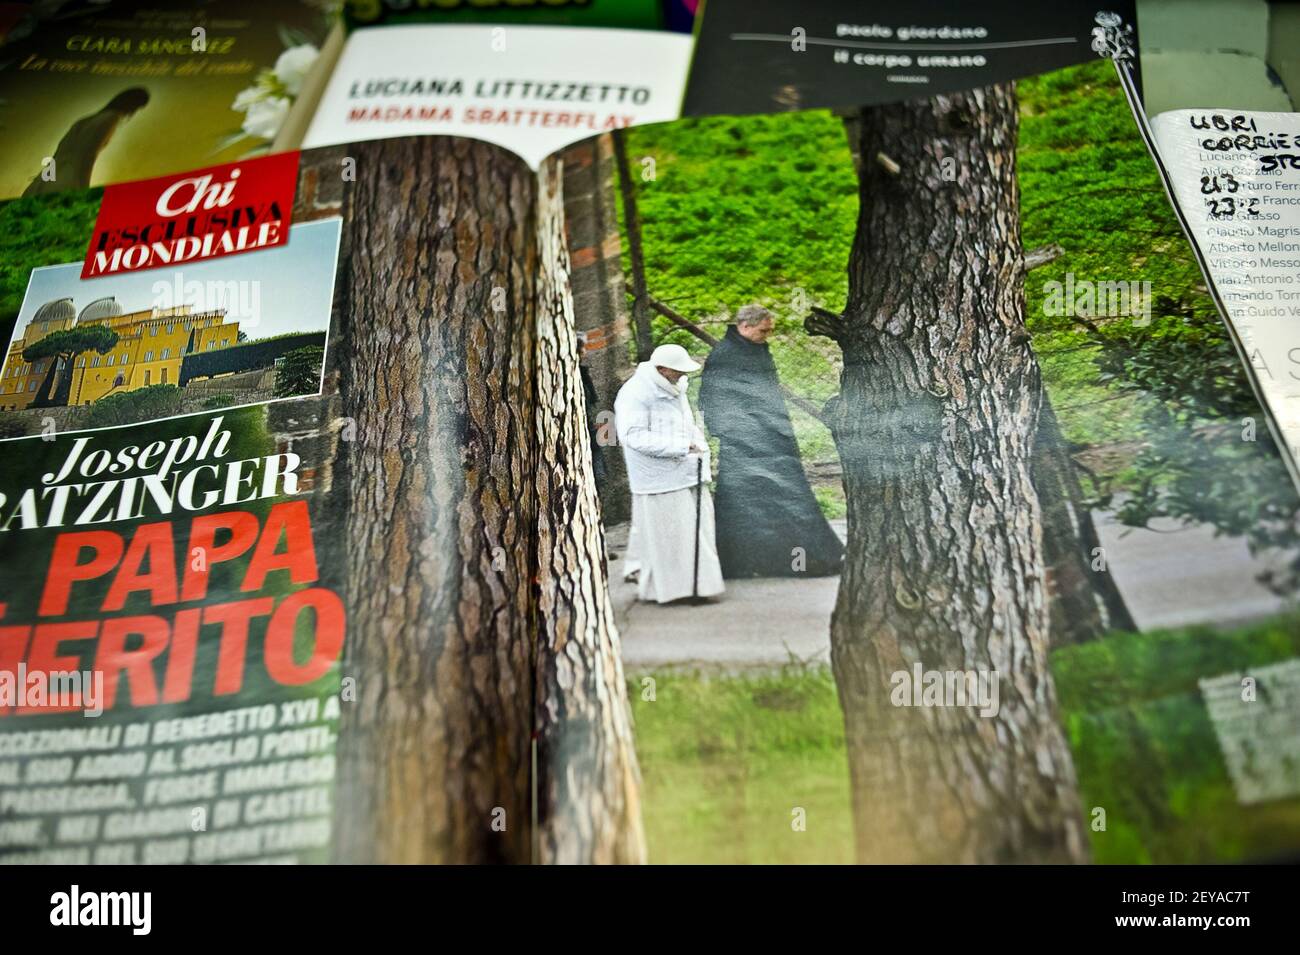 The Italian gossip Magazine CHI published in its current issue on March 07,  2013 paparazzi photos of the retired "Pope Emeritus" Benedict XVI as he  strolled in the grounds of the papal